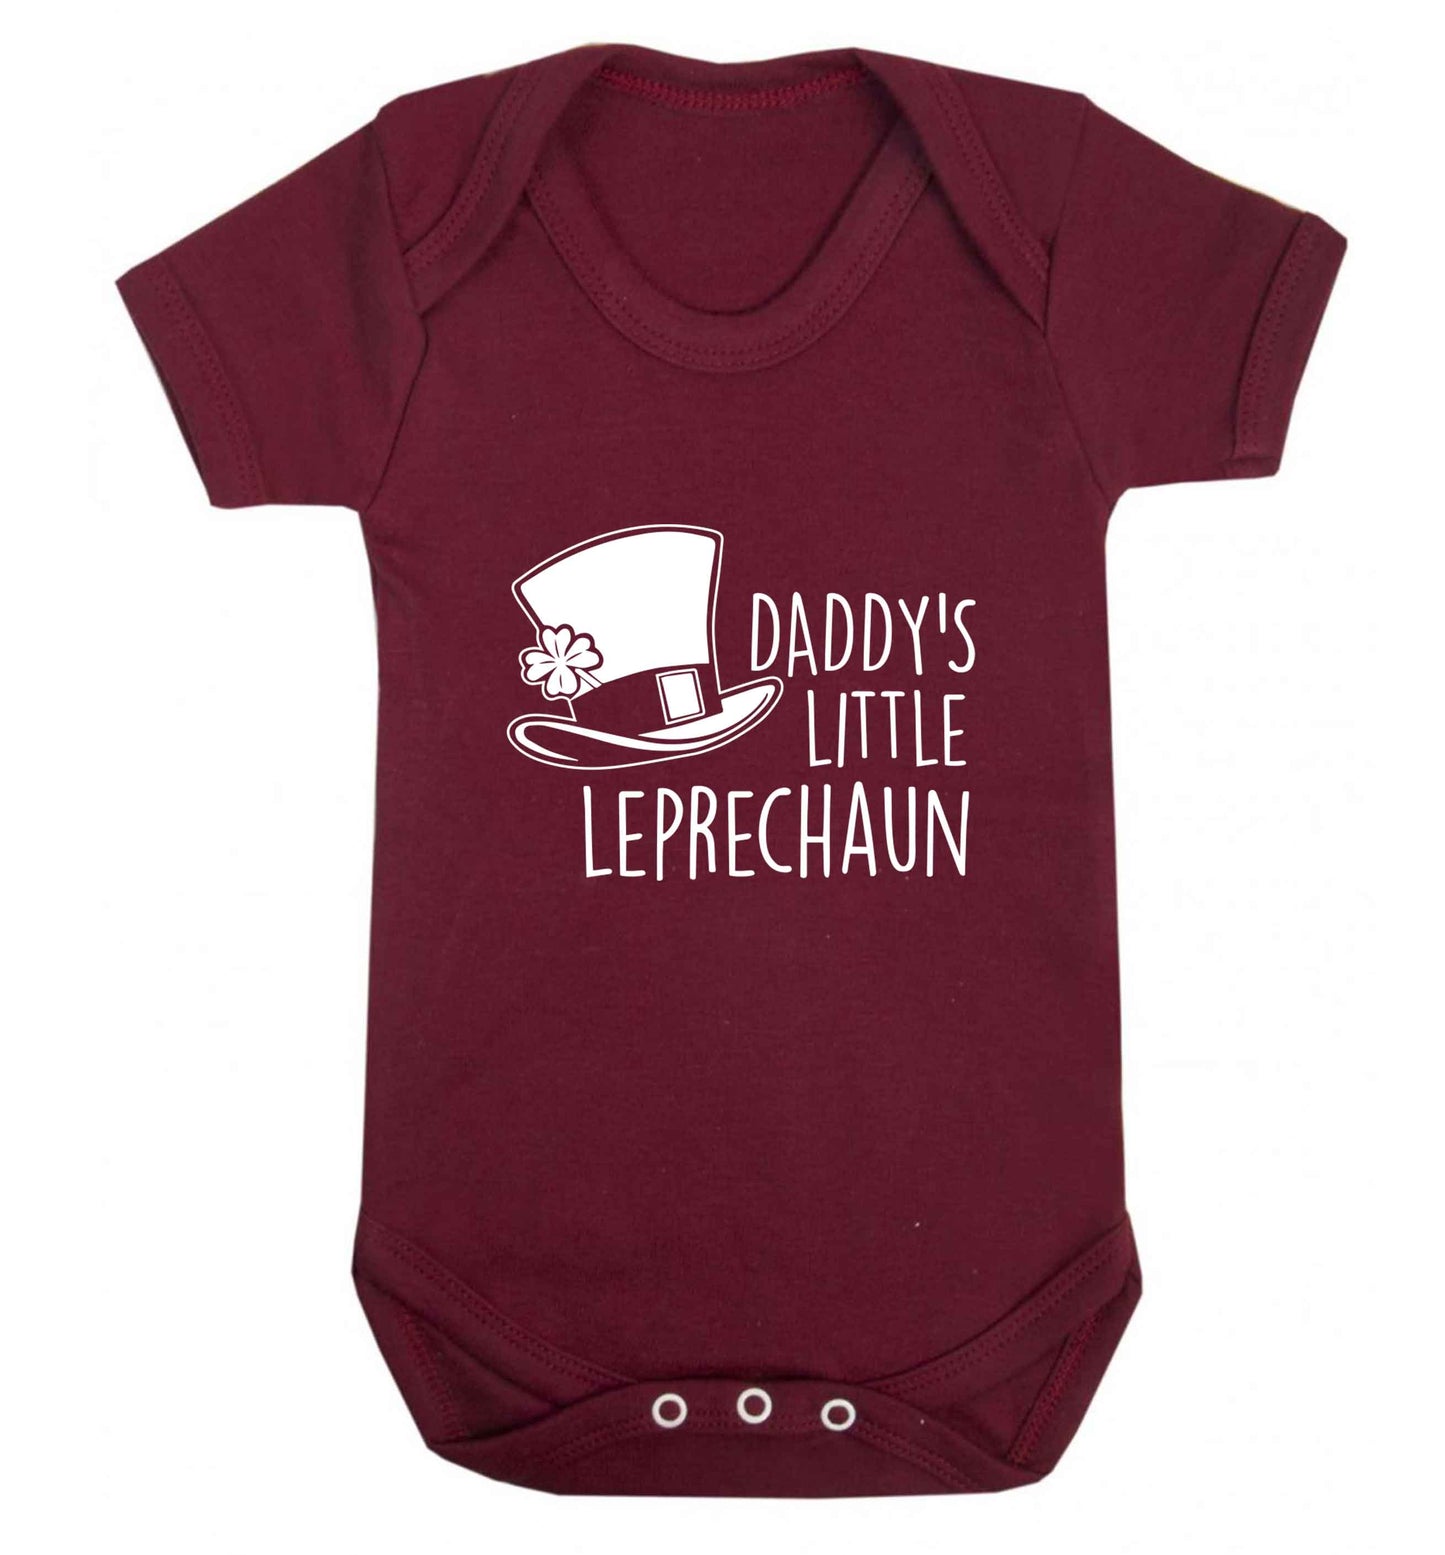 Daddy's lucky charm baby vest maroon 18-24 months